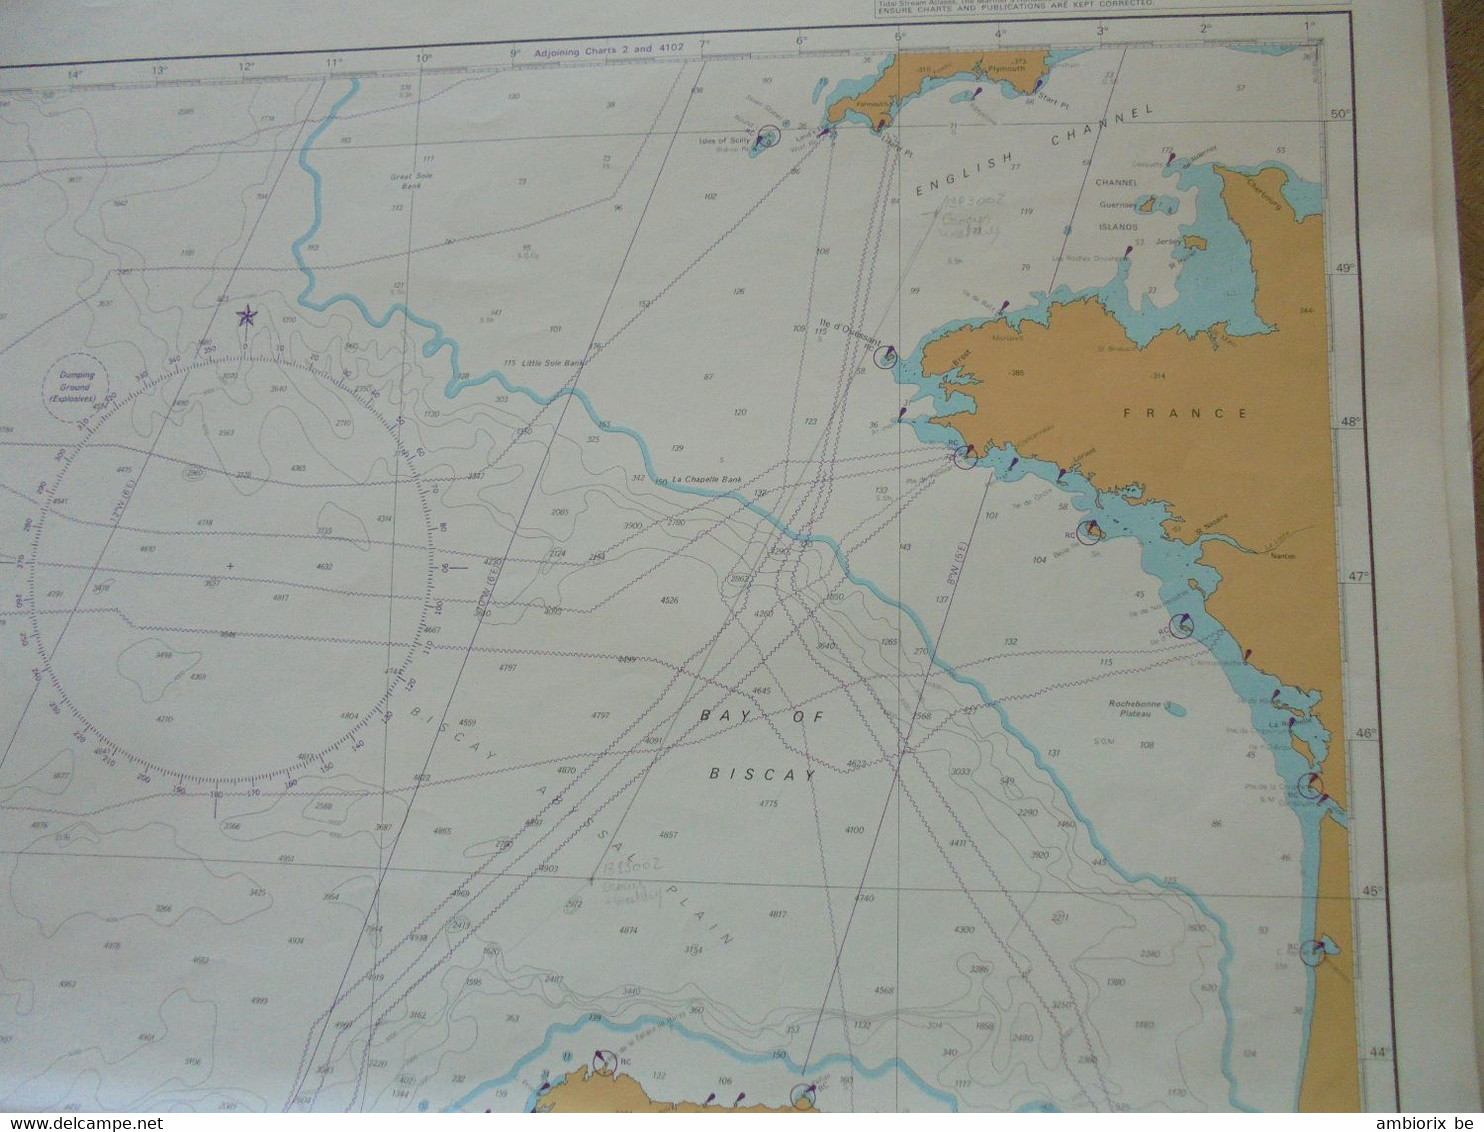 English Channel To The Strait Of Gibraltar Ant The Arquipelago Dos Acores - Carte Marine - Cartes Marines